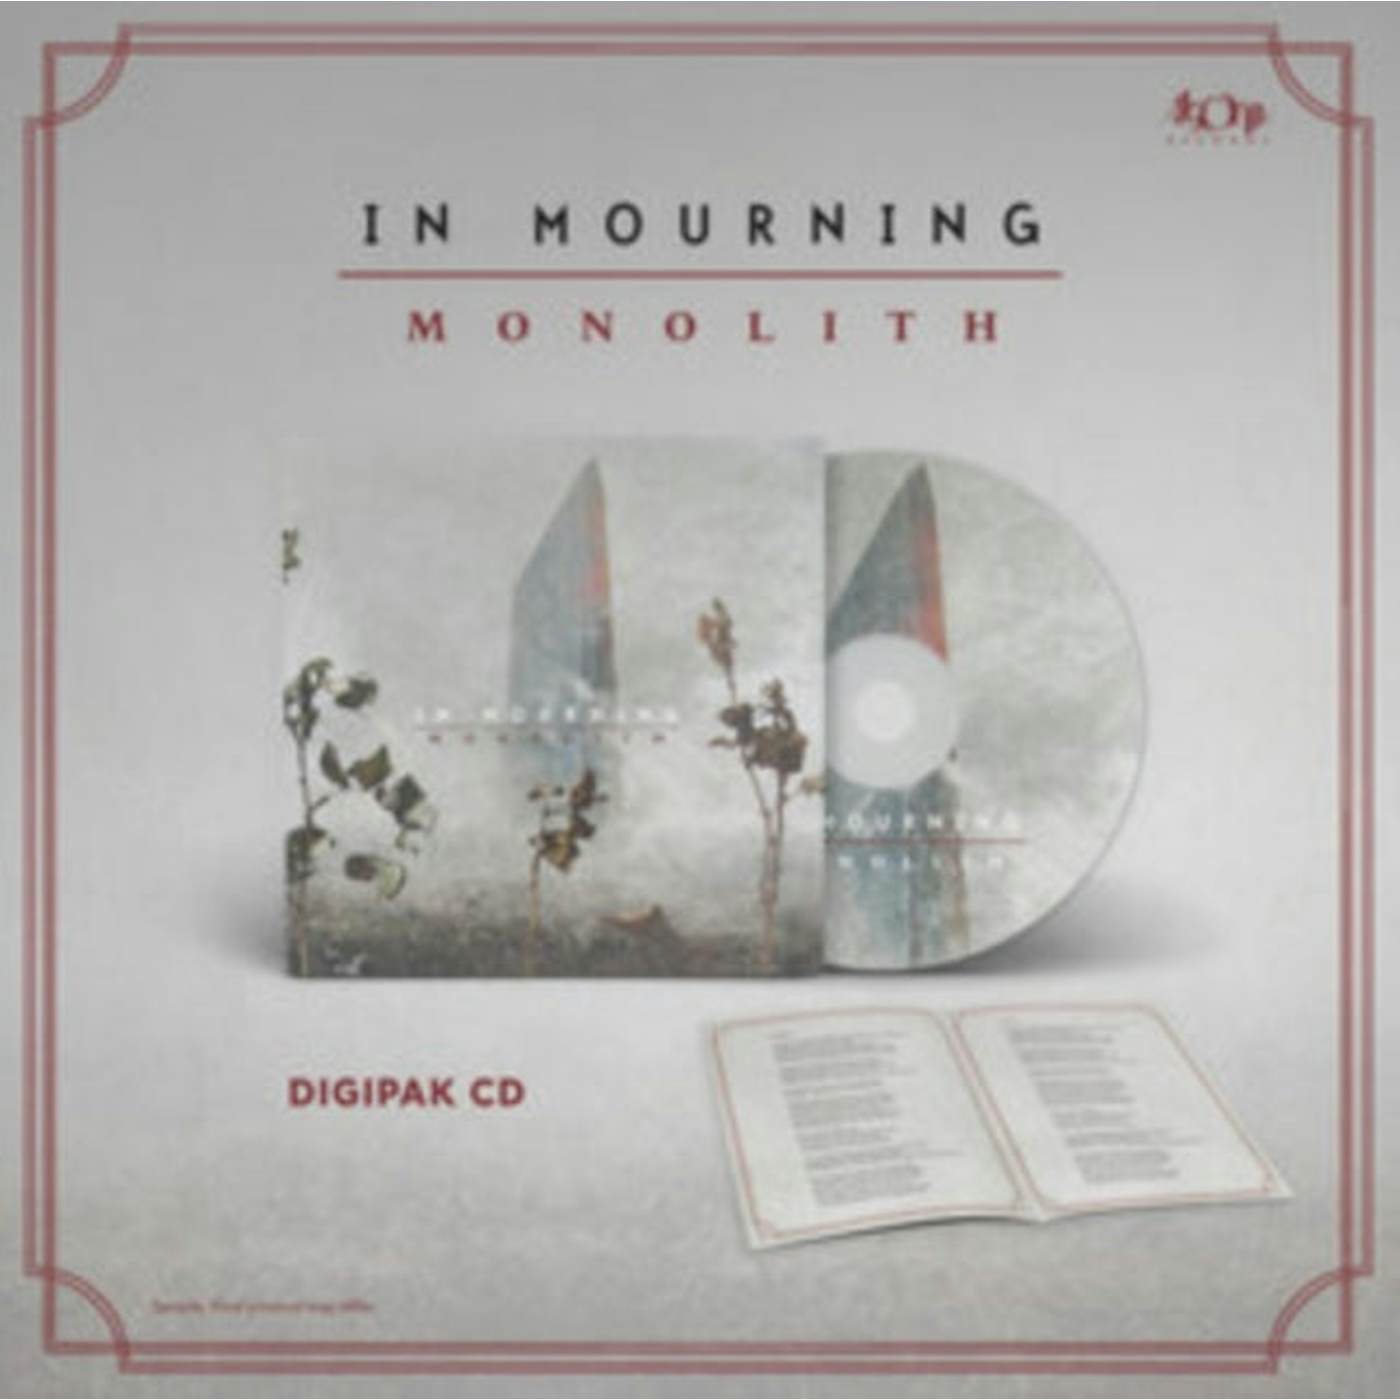 In Mourning CD - Monolith (Re-Issue)